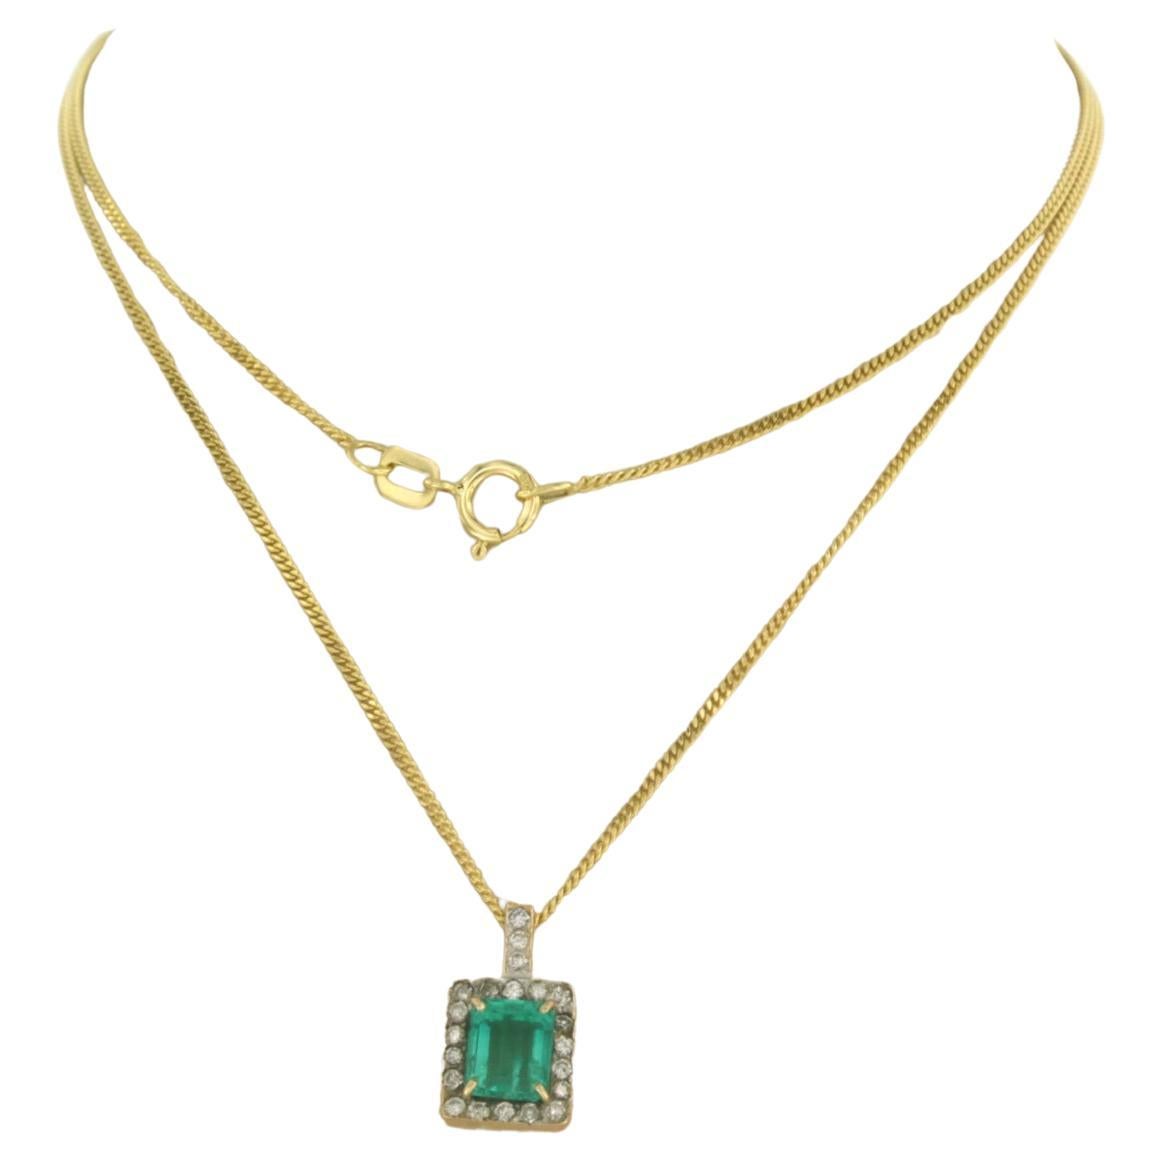 Necklace with pendant set with emerald and diamond 14k yellow gold